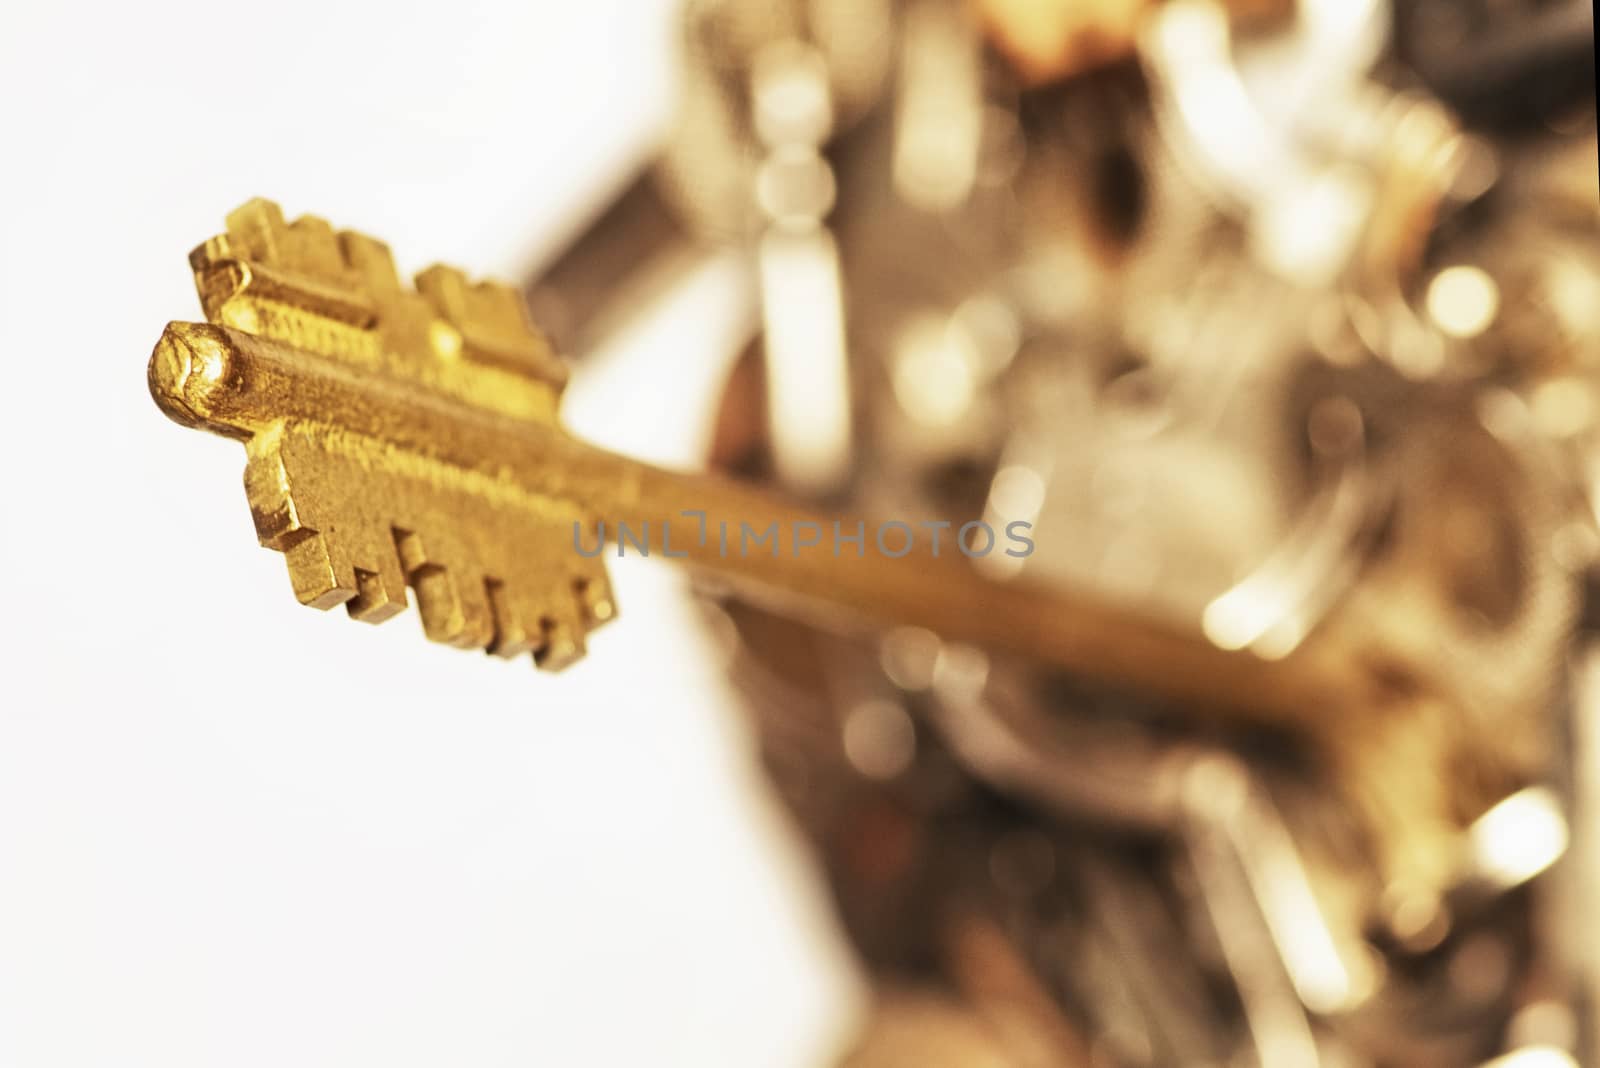 Many keys of different sizes. Keys on a white background, close-up. Selective focus, soft focus.